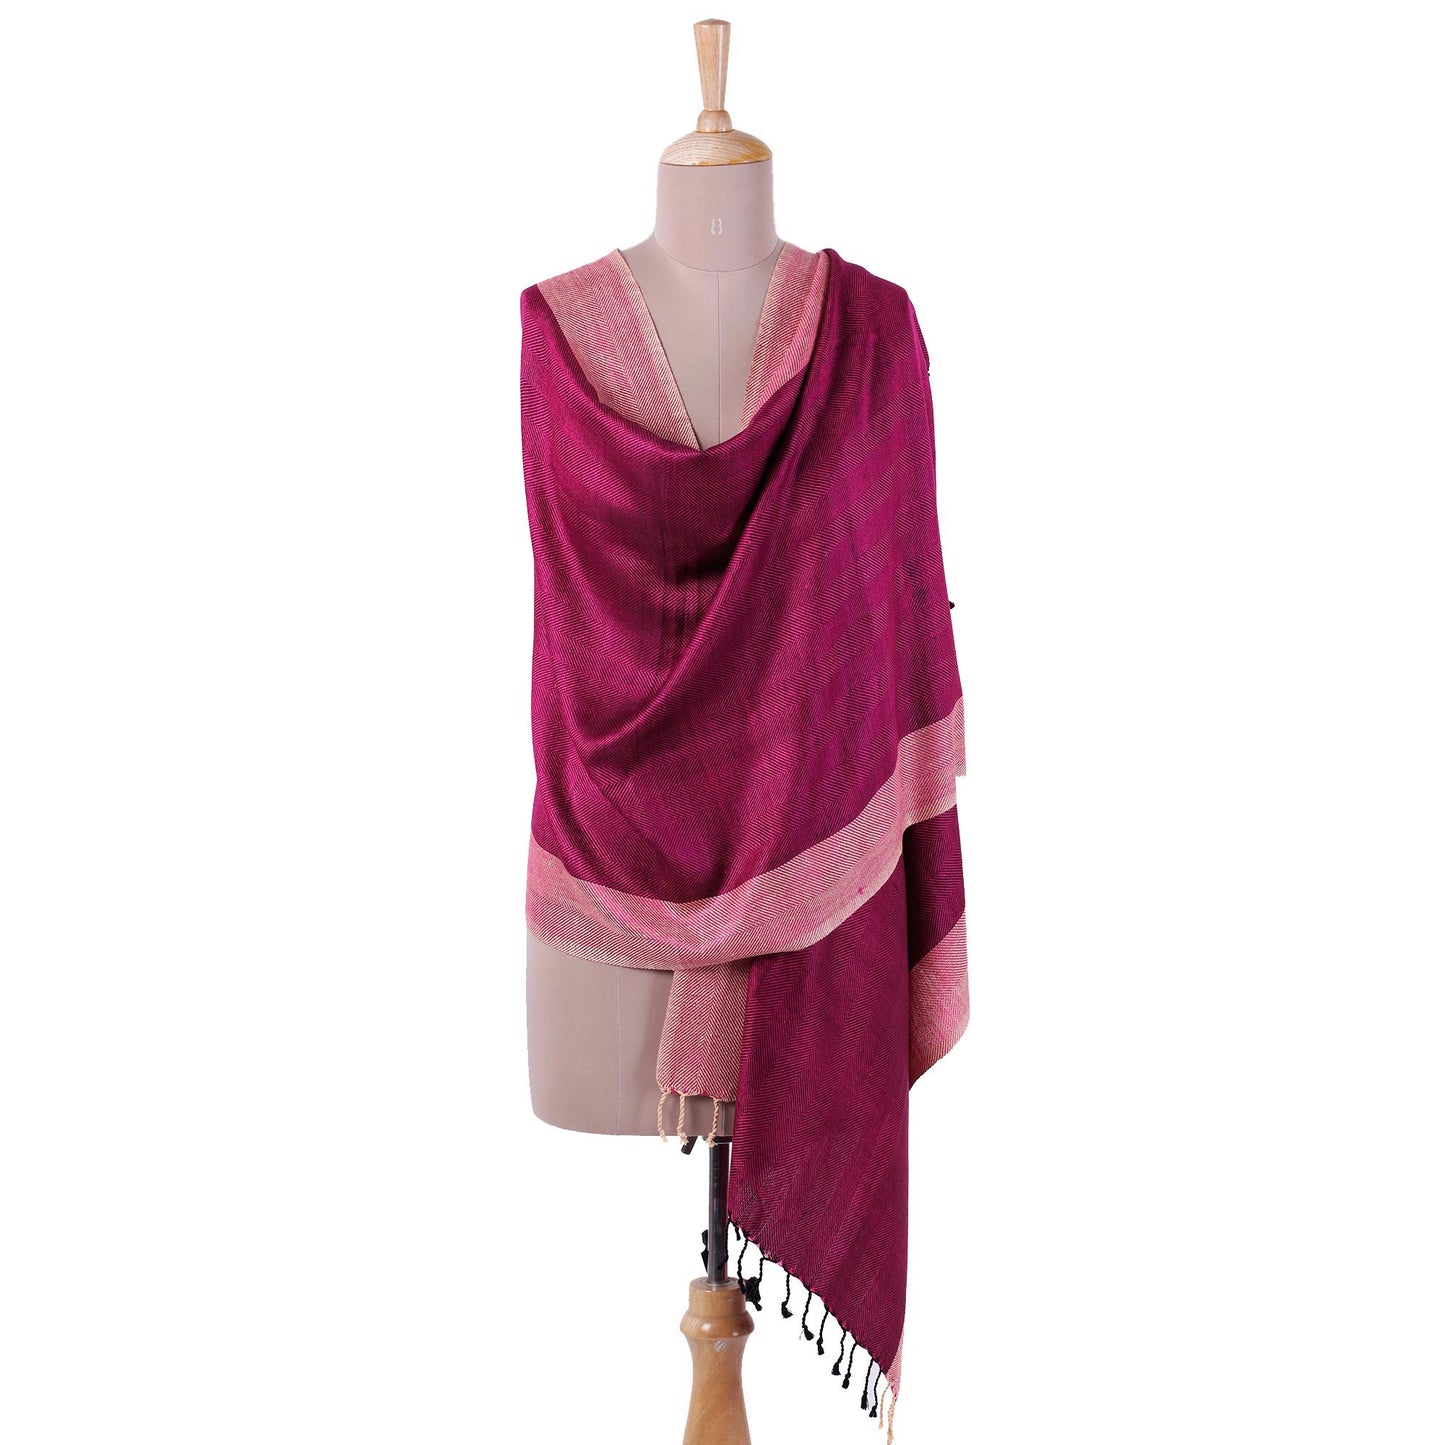 Fuchsia Glory Handwoven Silk Shawl in Fuchsia and Parchment from India